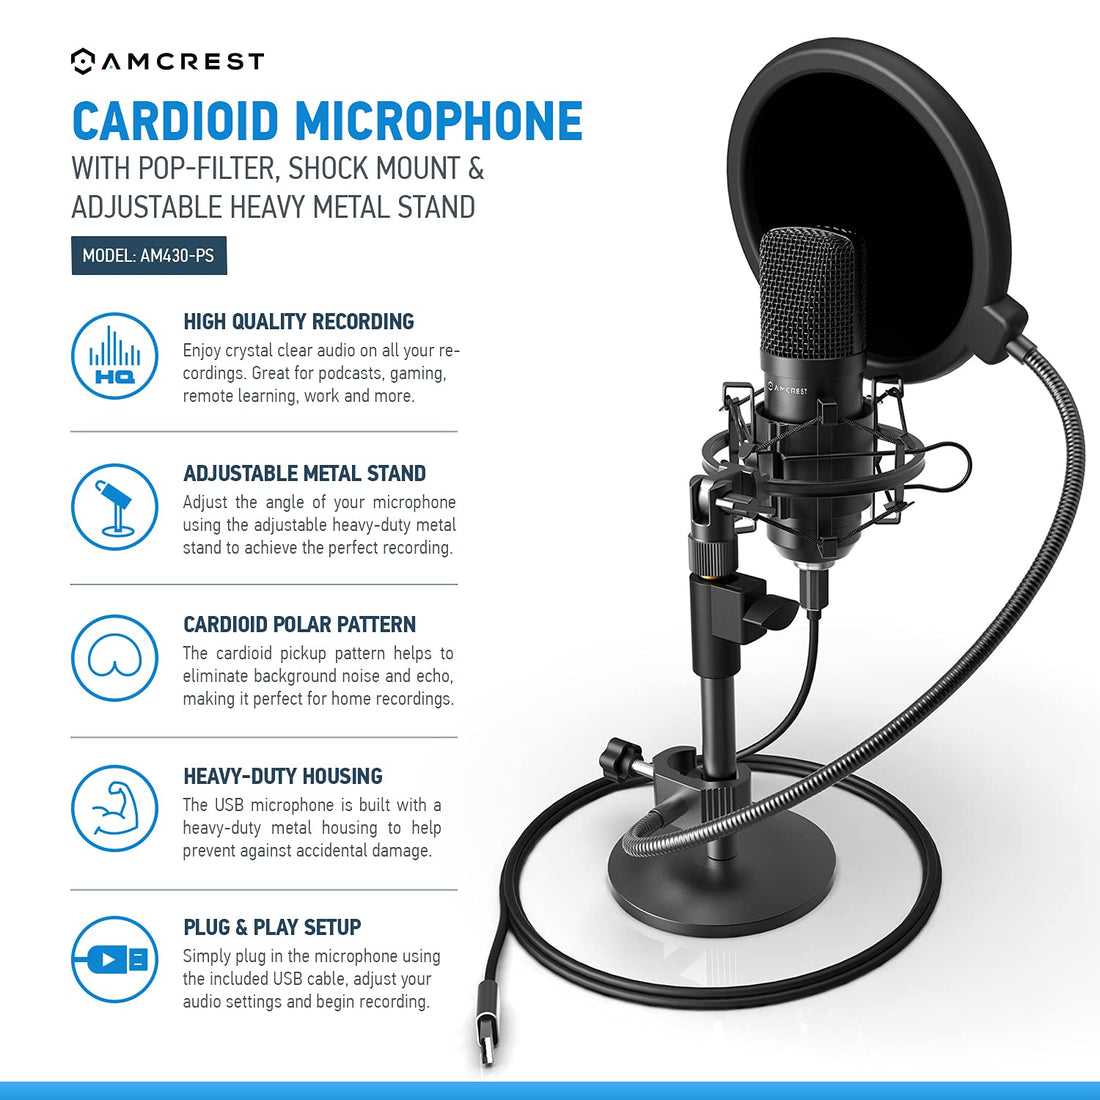 Amcrest USB Microphone for Voice Recordings, Podcasts, Gaming, Online Conferences, Live Streaming, Cardioid Microphone with Pop-Filter, Shock Mount, Adjustable Heavy Metal Stand, AM430-PS